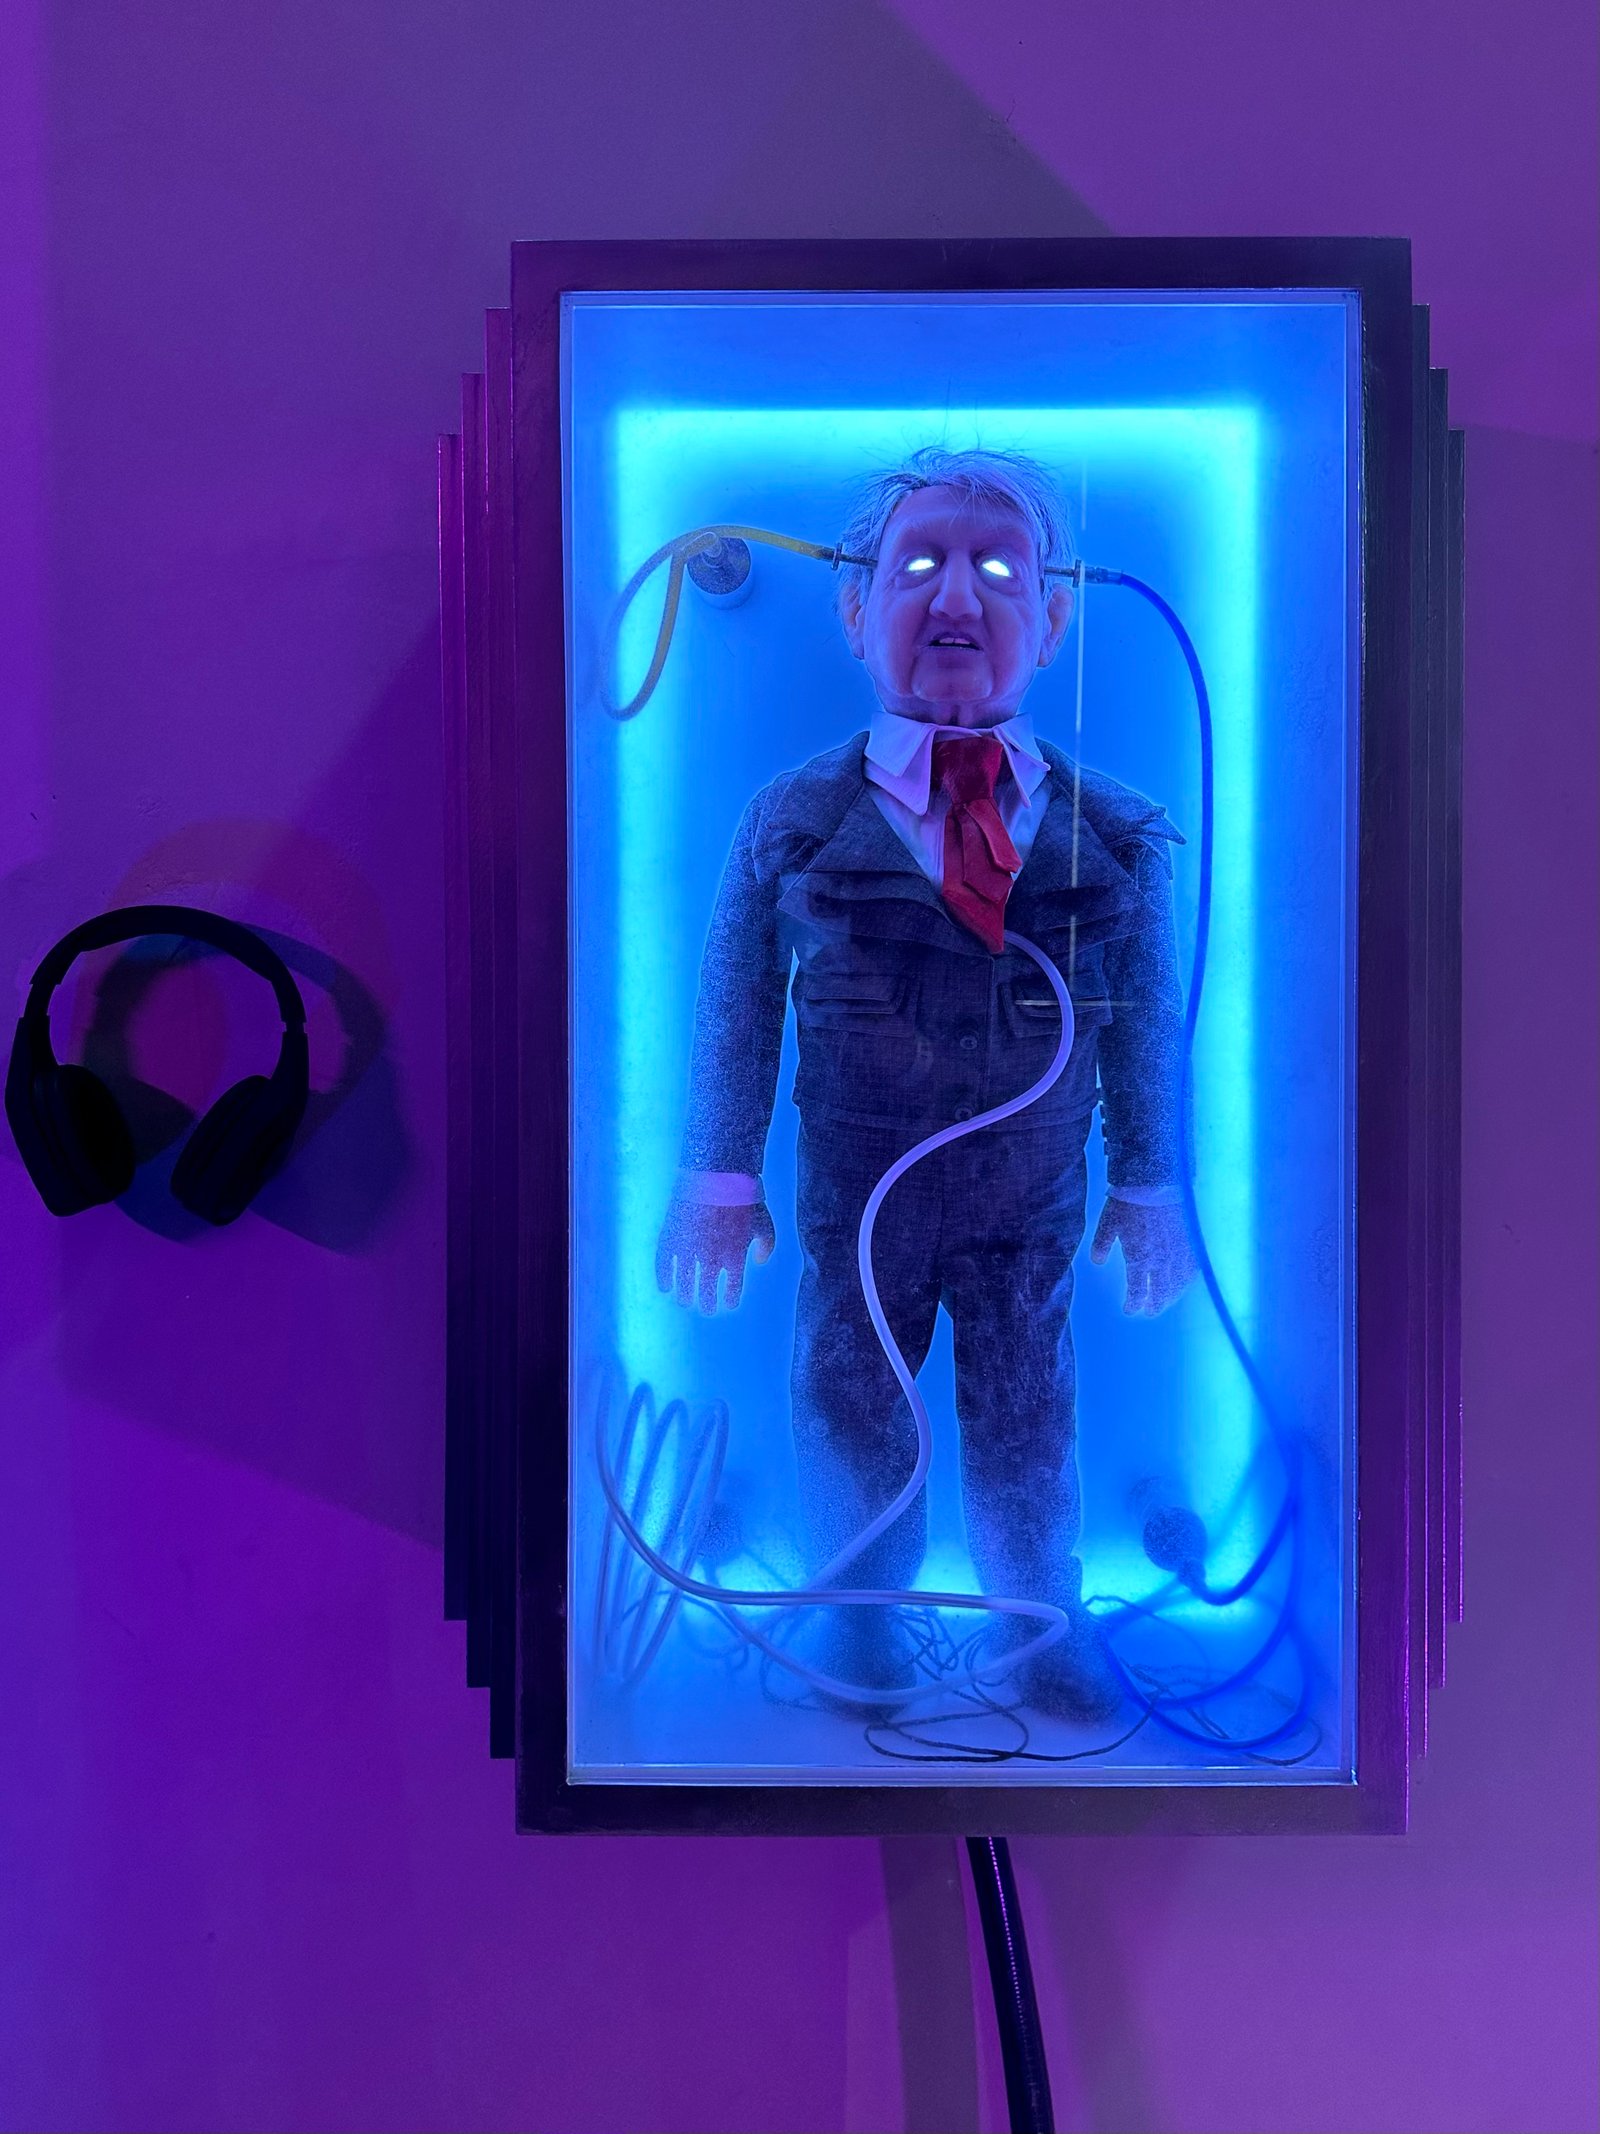 Romeo Gomez Lopez, Cold-pac (AMLO) 2023 silicon, latex, fabric, wood, acrylic, headphones, audio track, led lights 75 x 55 x 25 cm 29.5 x 21.6 x 9.8 in. Courtesy of the artist.
